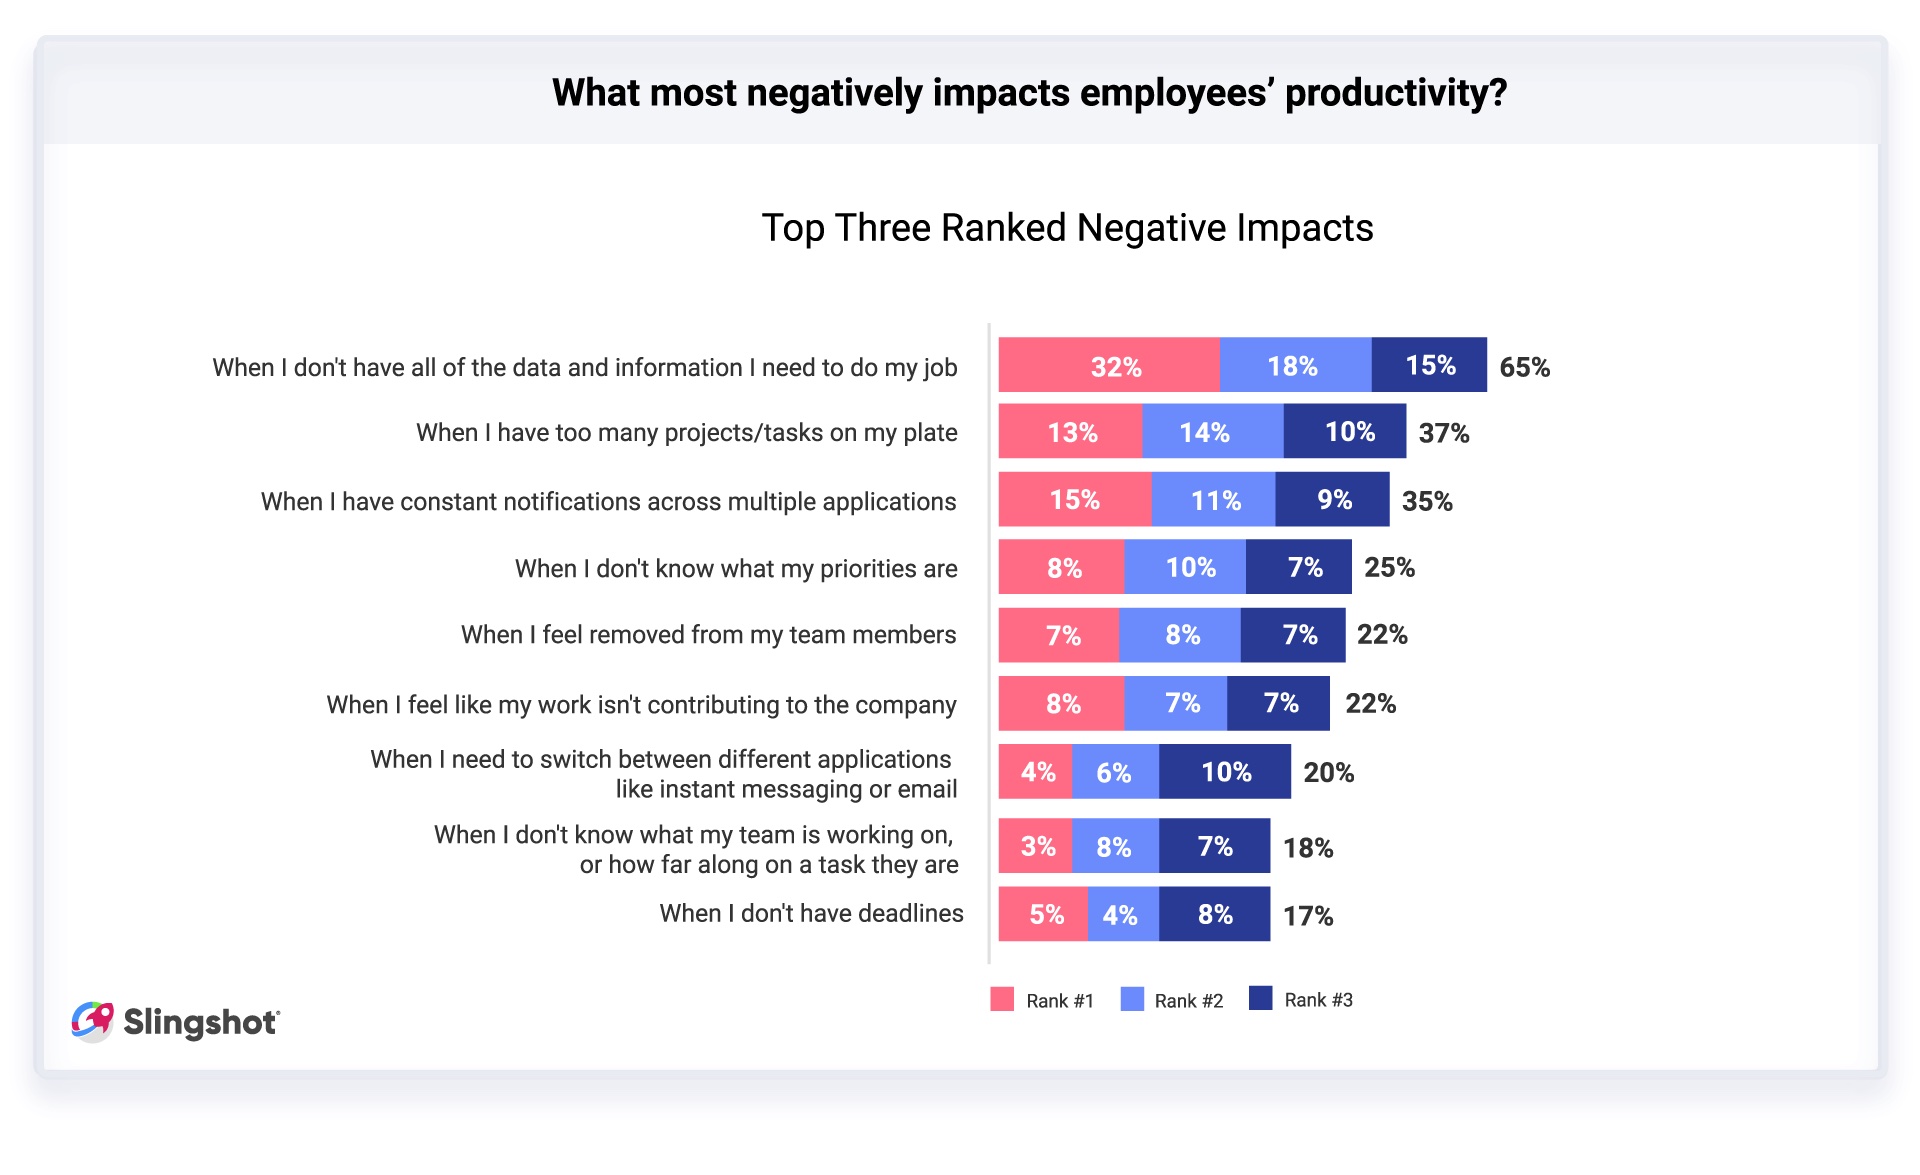 A lack of data negatively impacts the ability to get work done